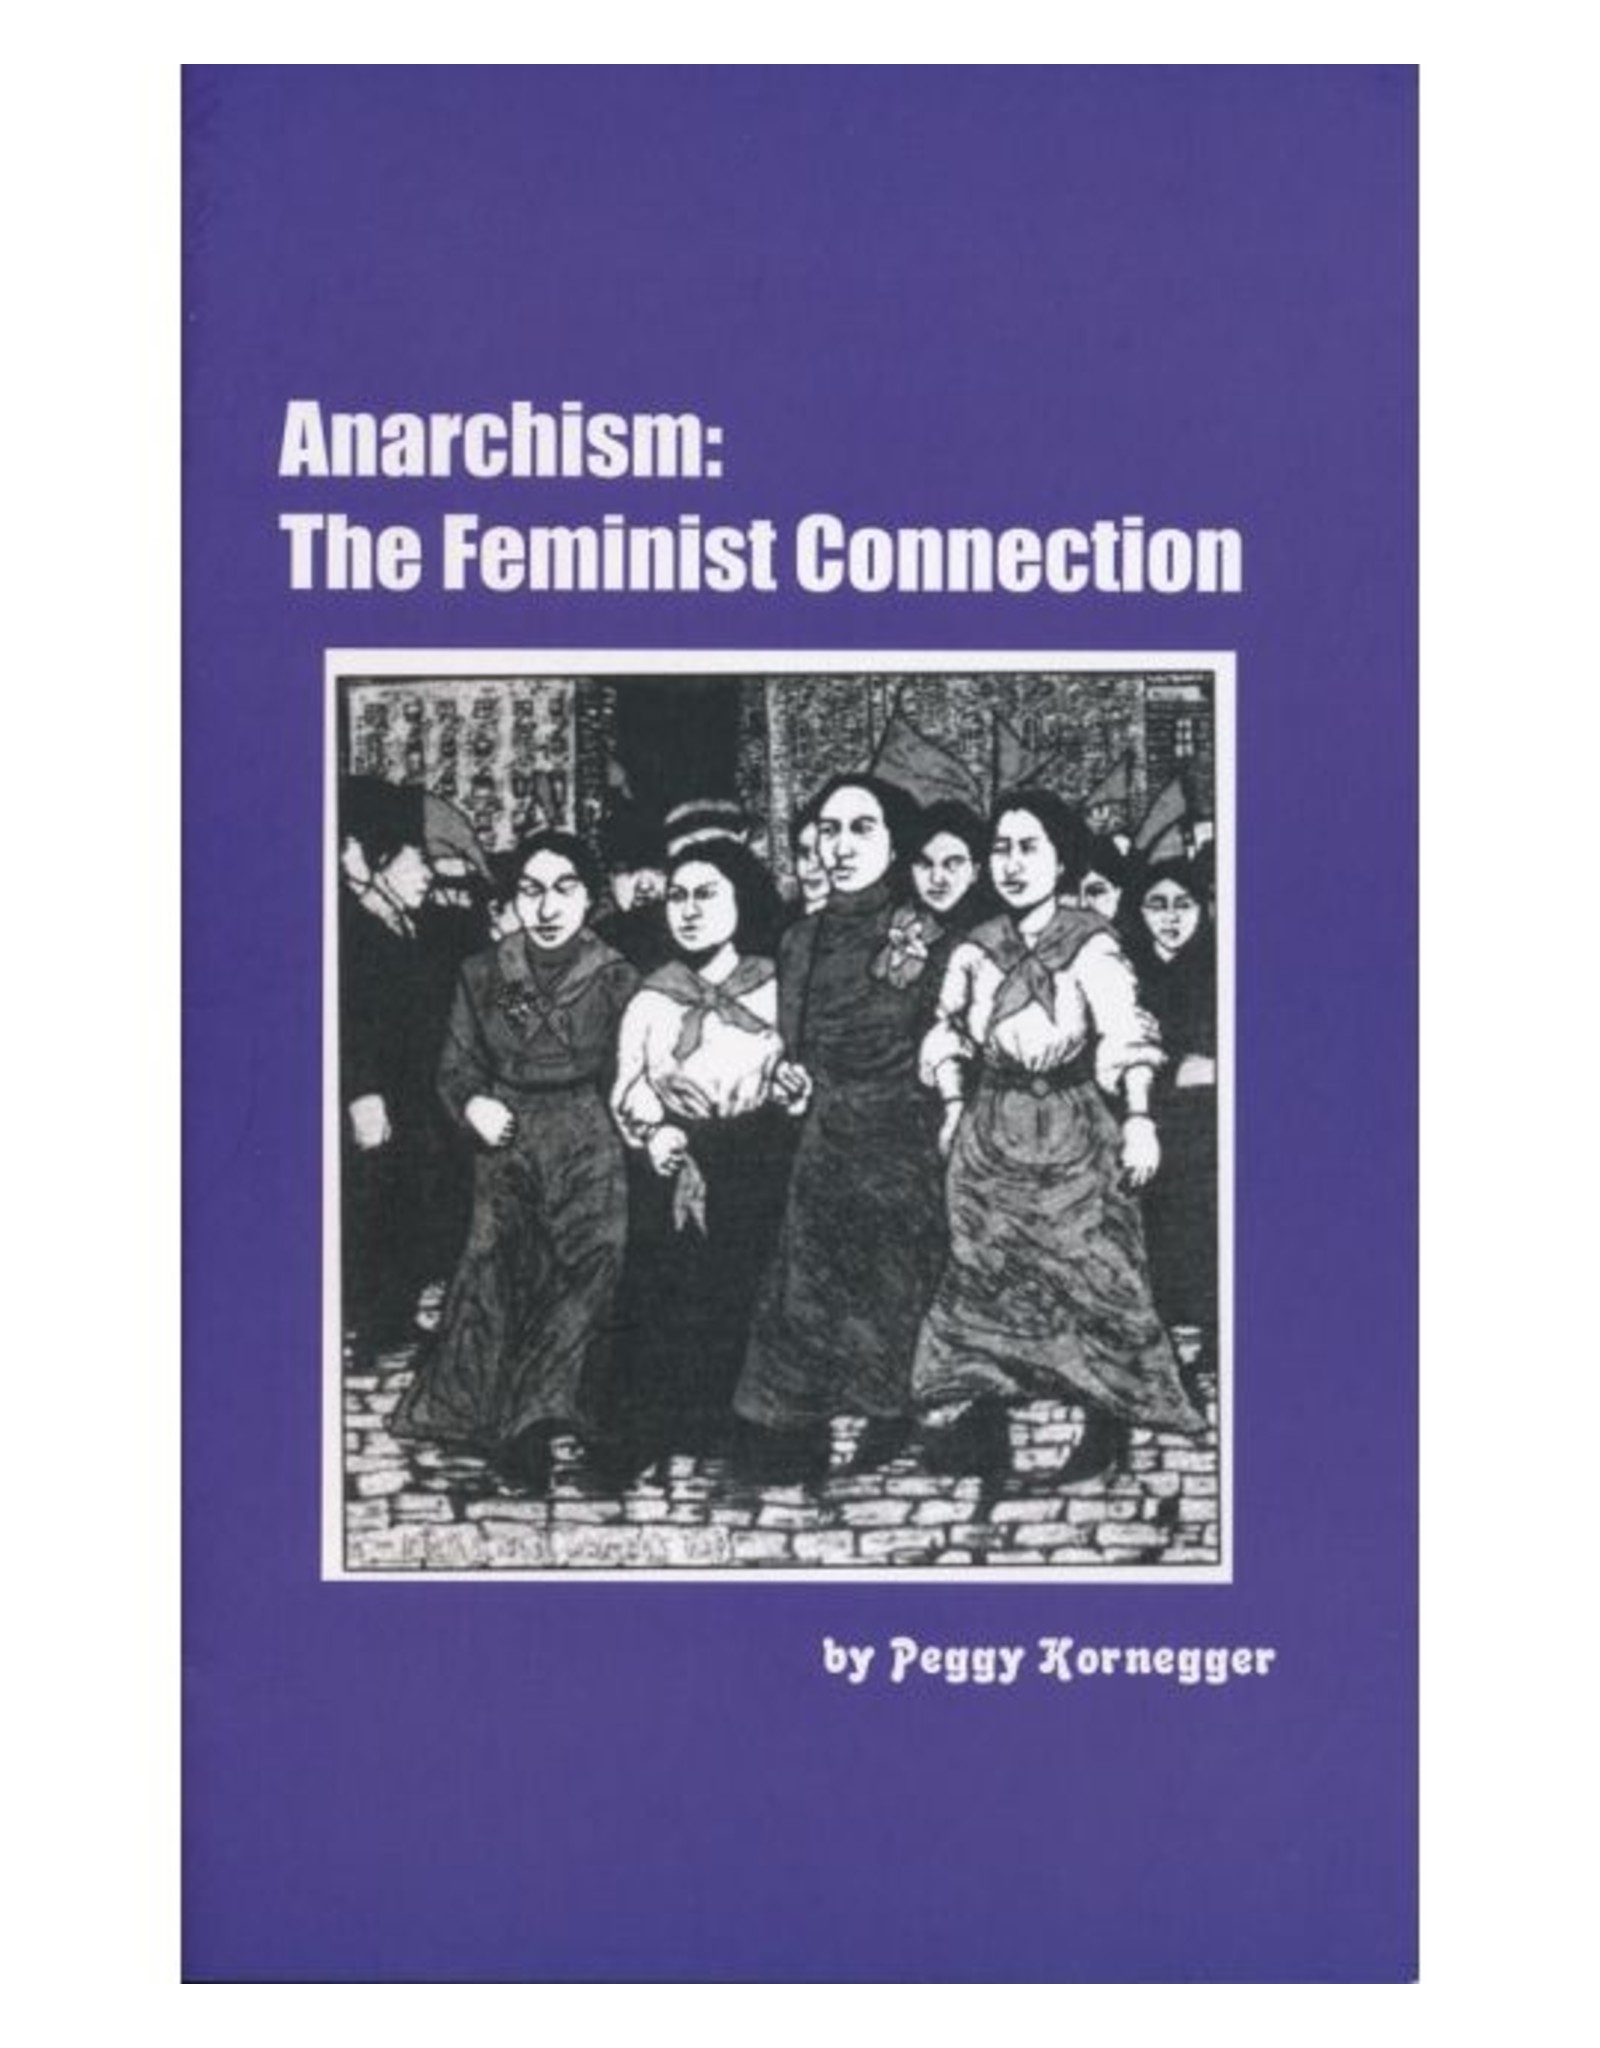 Literature Anarchism: The Feminist Connection